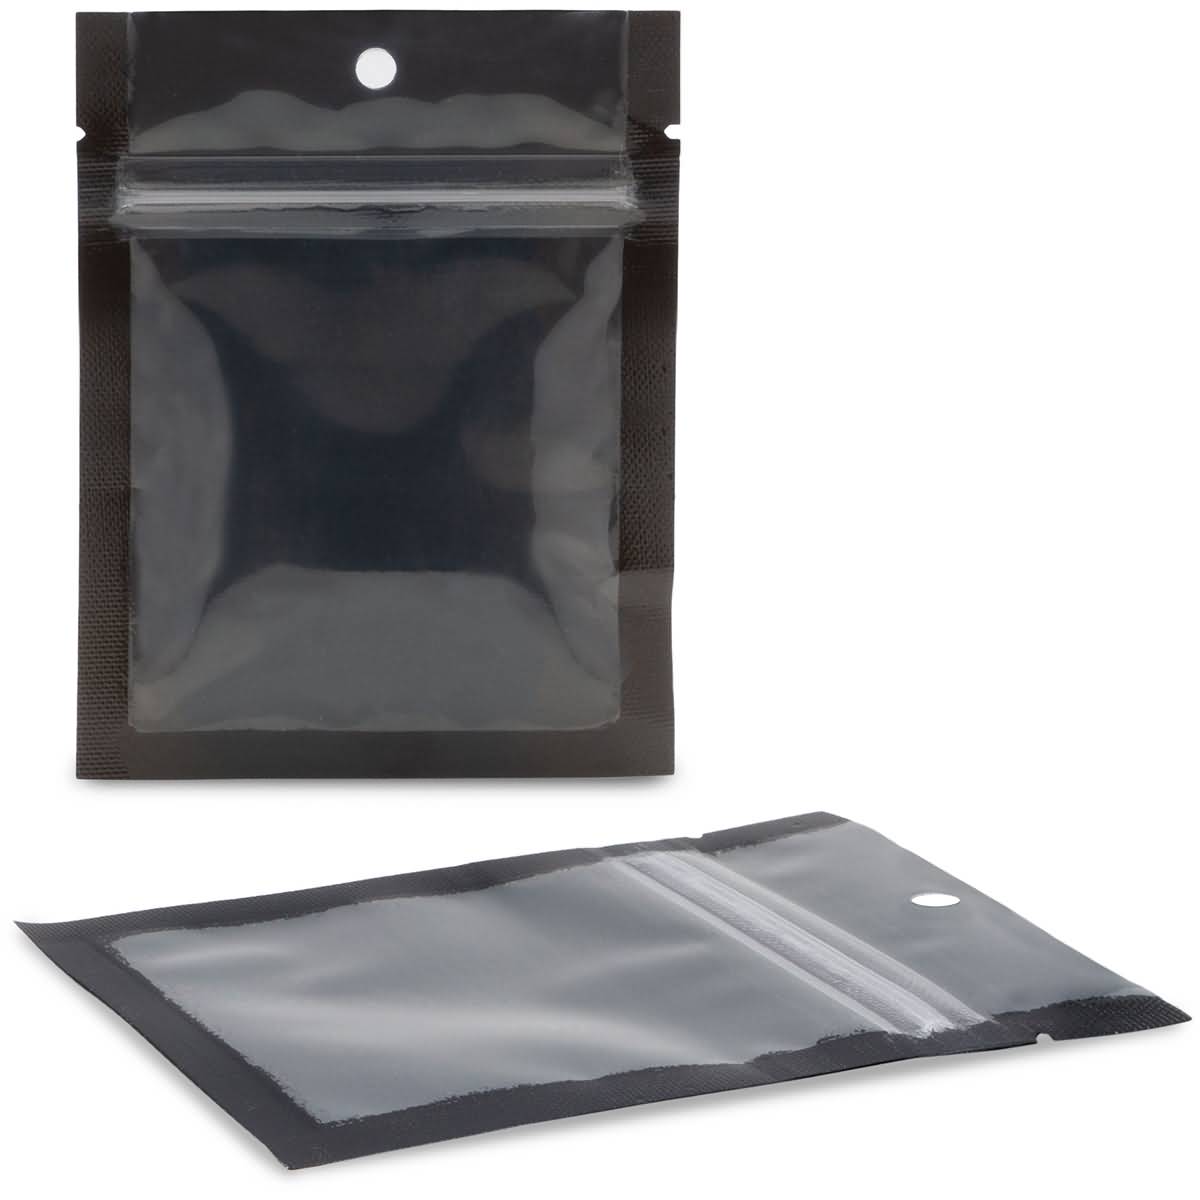 Clear/Black 3.5×4.5 – Carepac #1 Best Place For Packaging